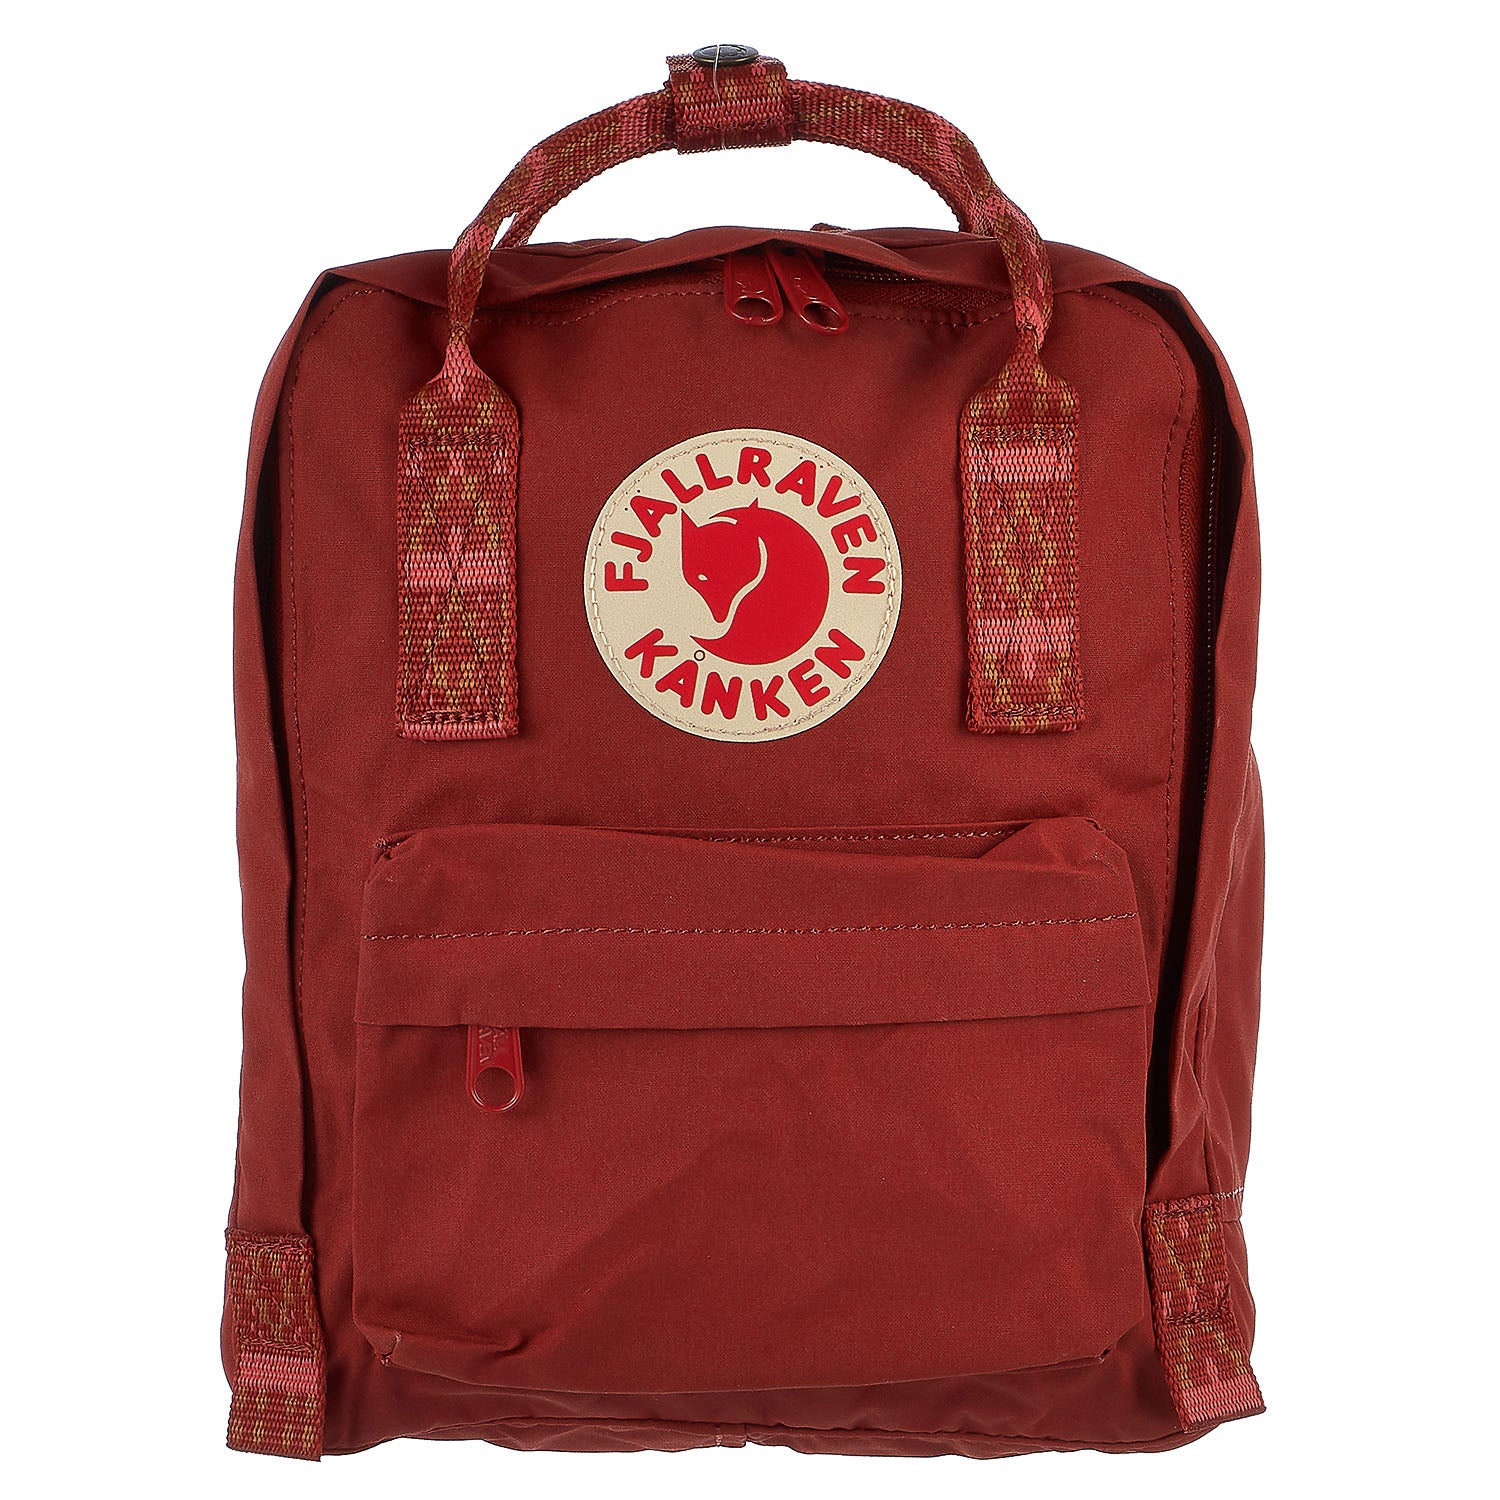 Foressence FE7017-RED Genuine Leather Kingston Backpack - Red